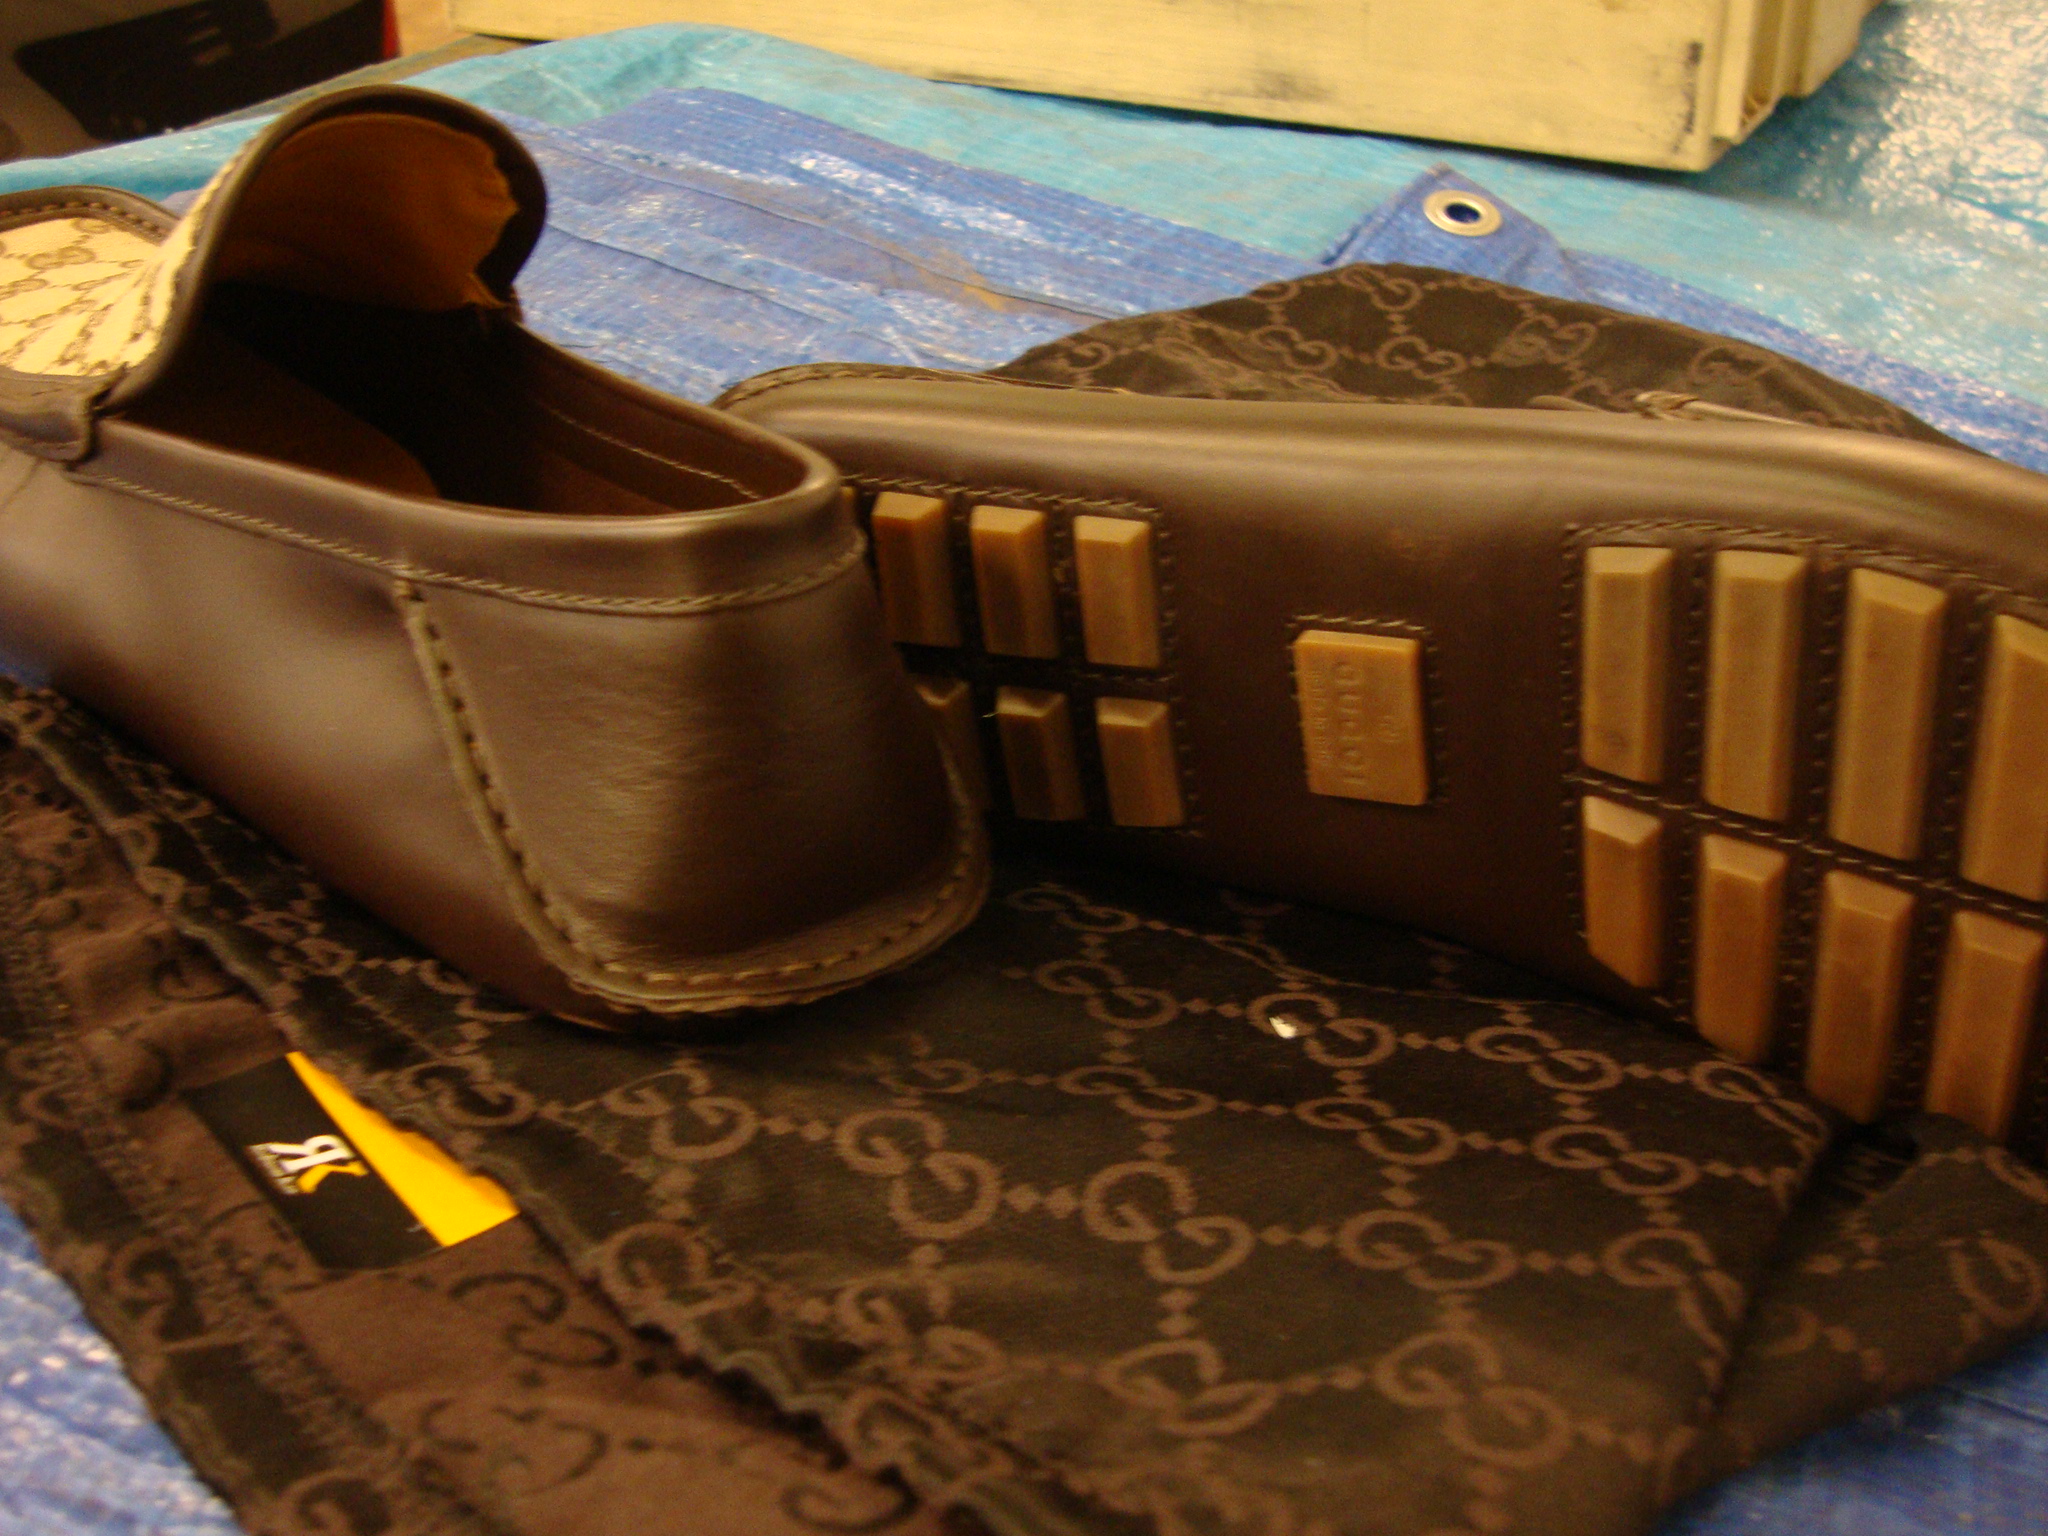 Pair of Gucci men's loafers/driving shoes in chocolate brown leather plus Gucci fabric upper. Size - Image 4 of 5